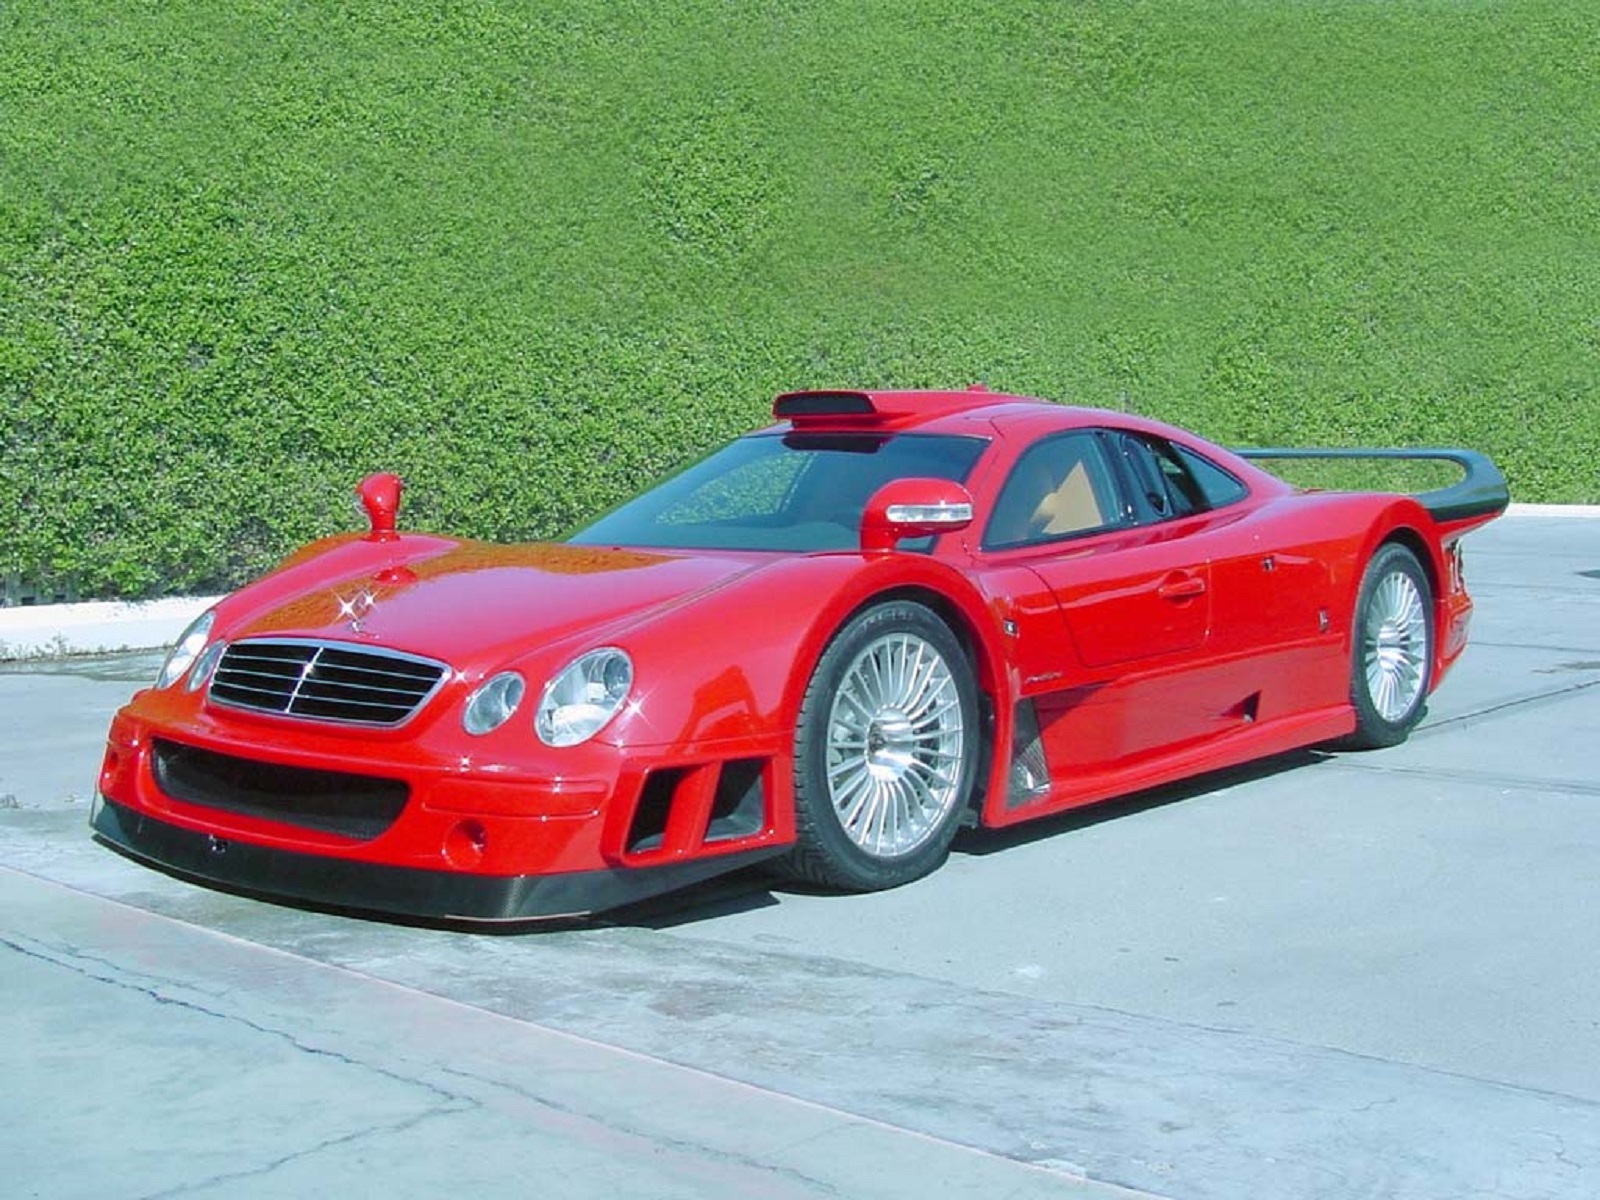 The most powerful variant—the CLK GTR Super Sport